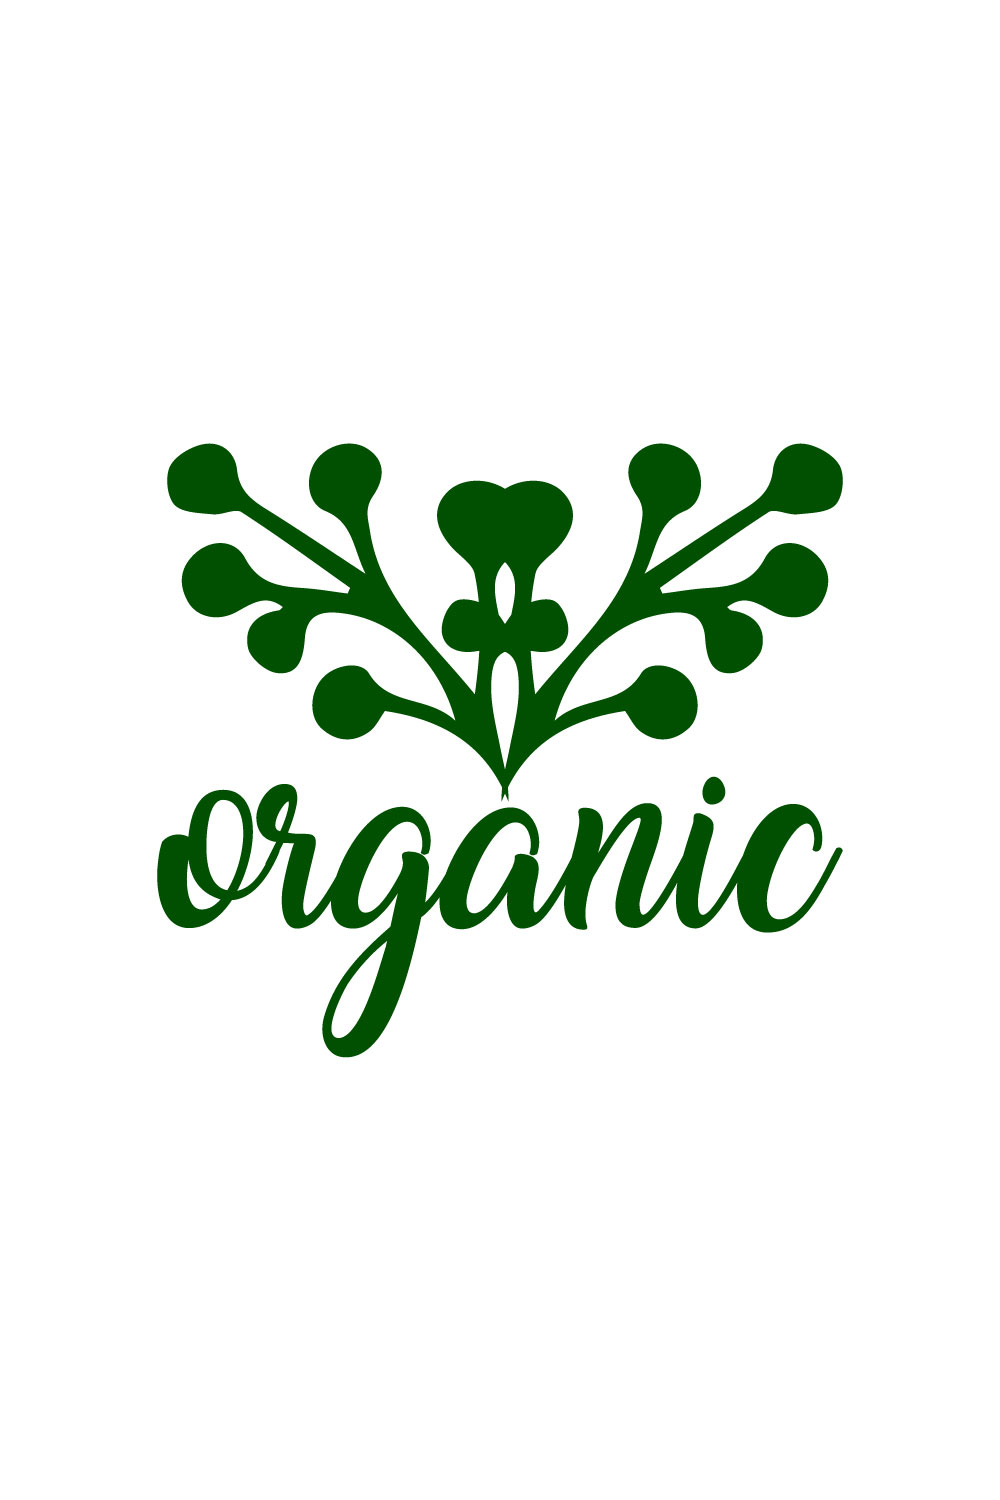 Free Healthy organic logo pinterest preview image.